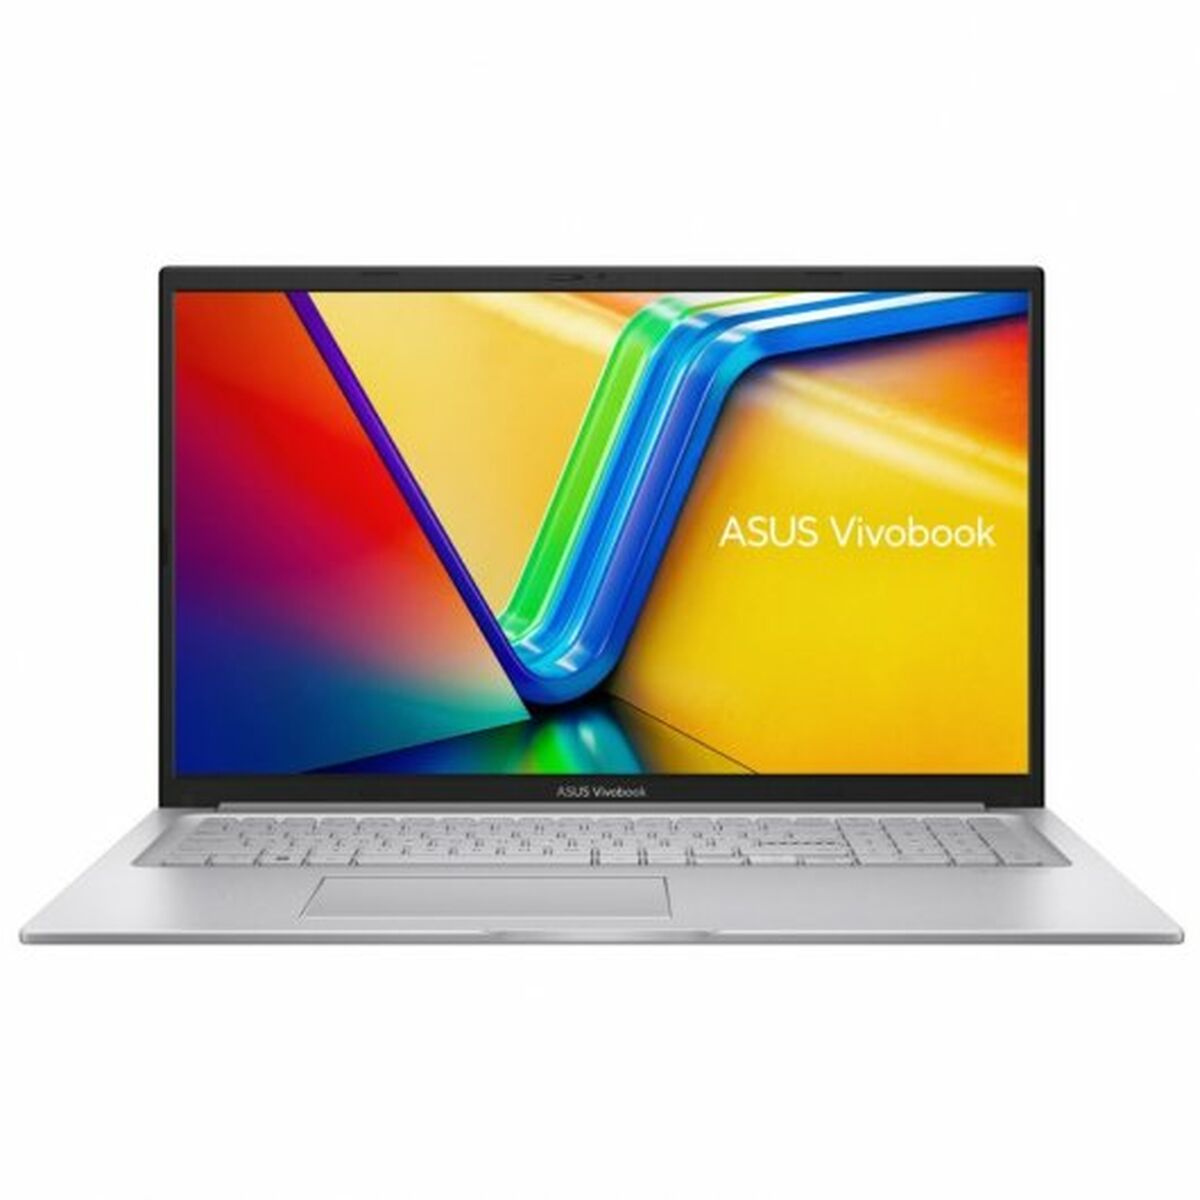 Laptop Asus 90NB10V1-M006W0 17,3" Intel Core i7-1355U 16 GB RAM 512 GB SSD, Asus, Computing, notebook-asus-90nb10v1-m006w0-16-gb-ram-17-3-intel-core-i7-1355u, :2-in-1, :512 GB, :Intel-i7, :QWERTY, :RAM 16 GB, :Touchscreen, Brand_Asus, category-reference-2609, category-reference-2791, category-reference-2797, category-reference-t-19685, Condition_NEW, office, Price_+ 1000, Teleworking, RiotNook